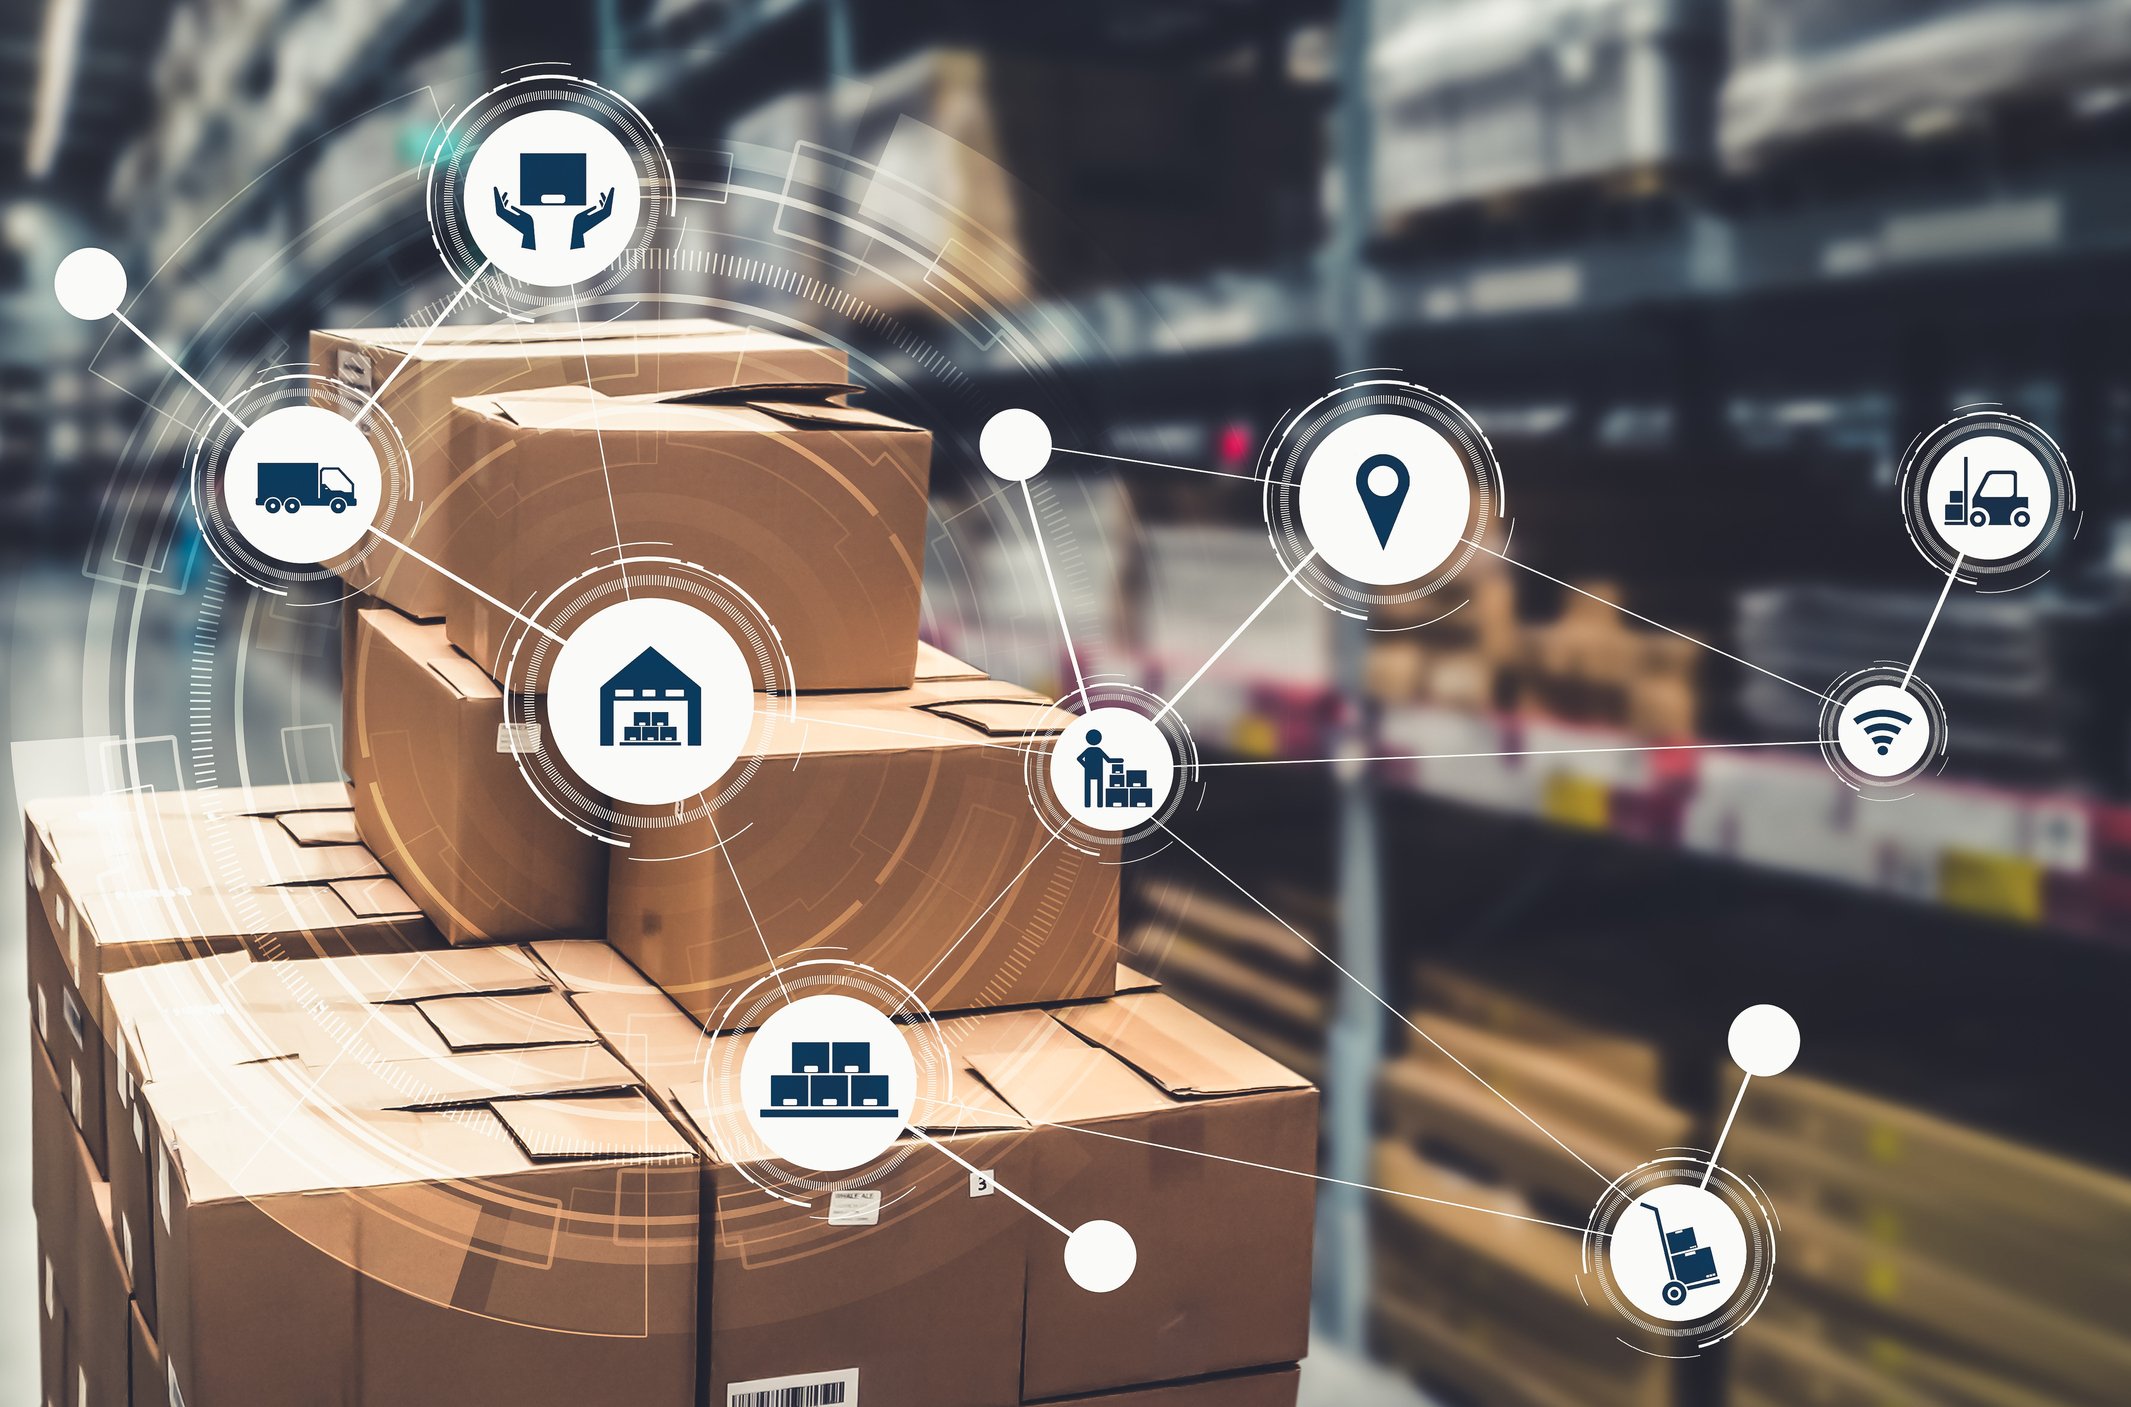 Supply chain in an eCommerce marketplace